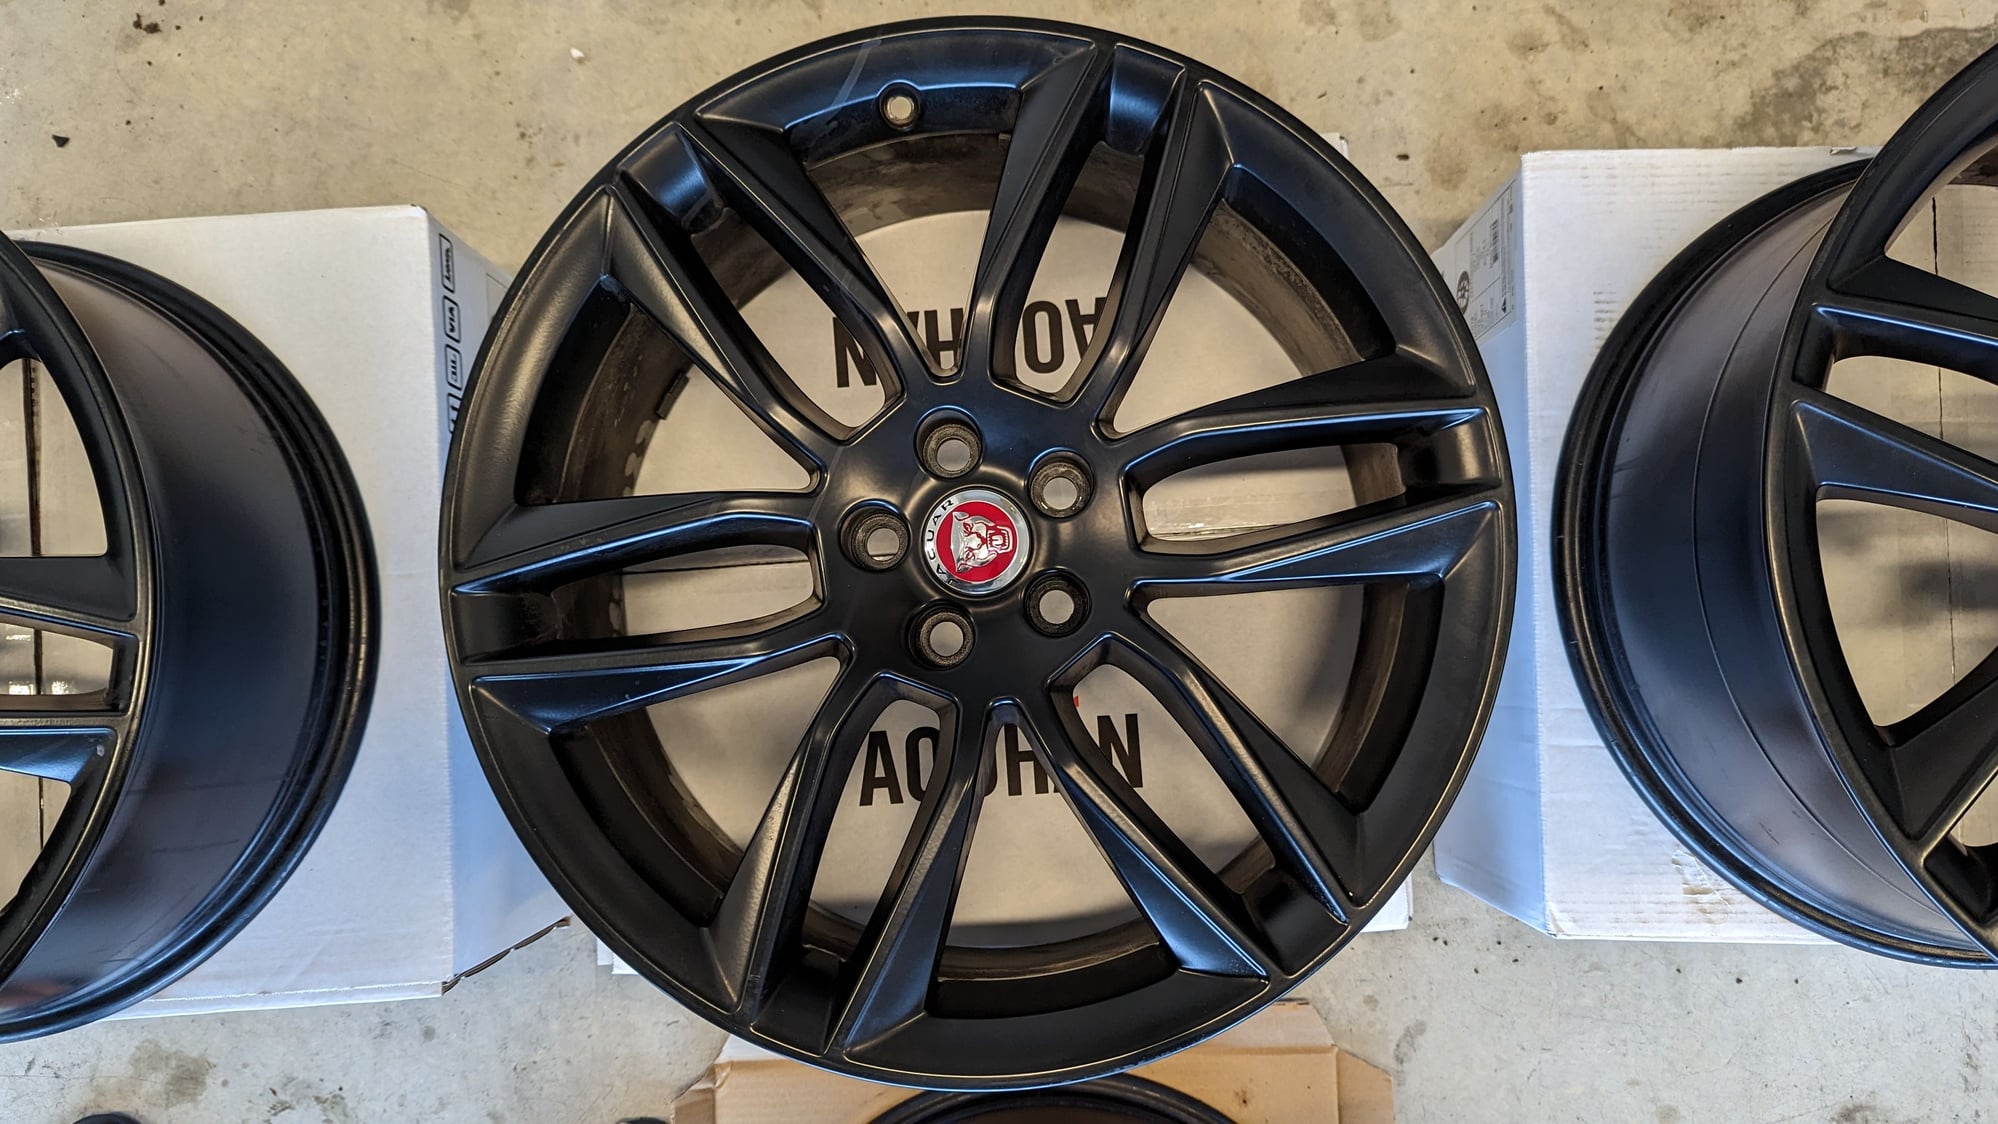 Wheels and Tires/Axles - 20 Inch Jaguar F-Type Gyrodyne Wheels Rims in rare Satin Black - Used - 0  All Models - Rancho Cucamonga, CA 91730, United States